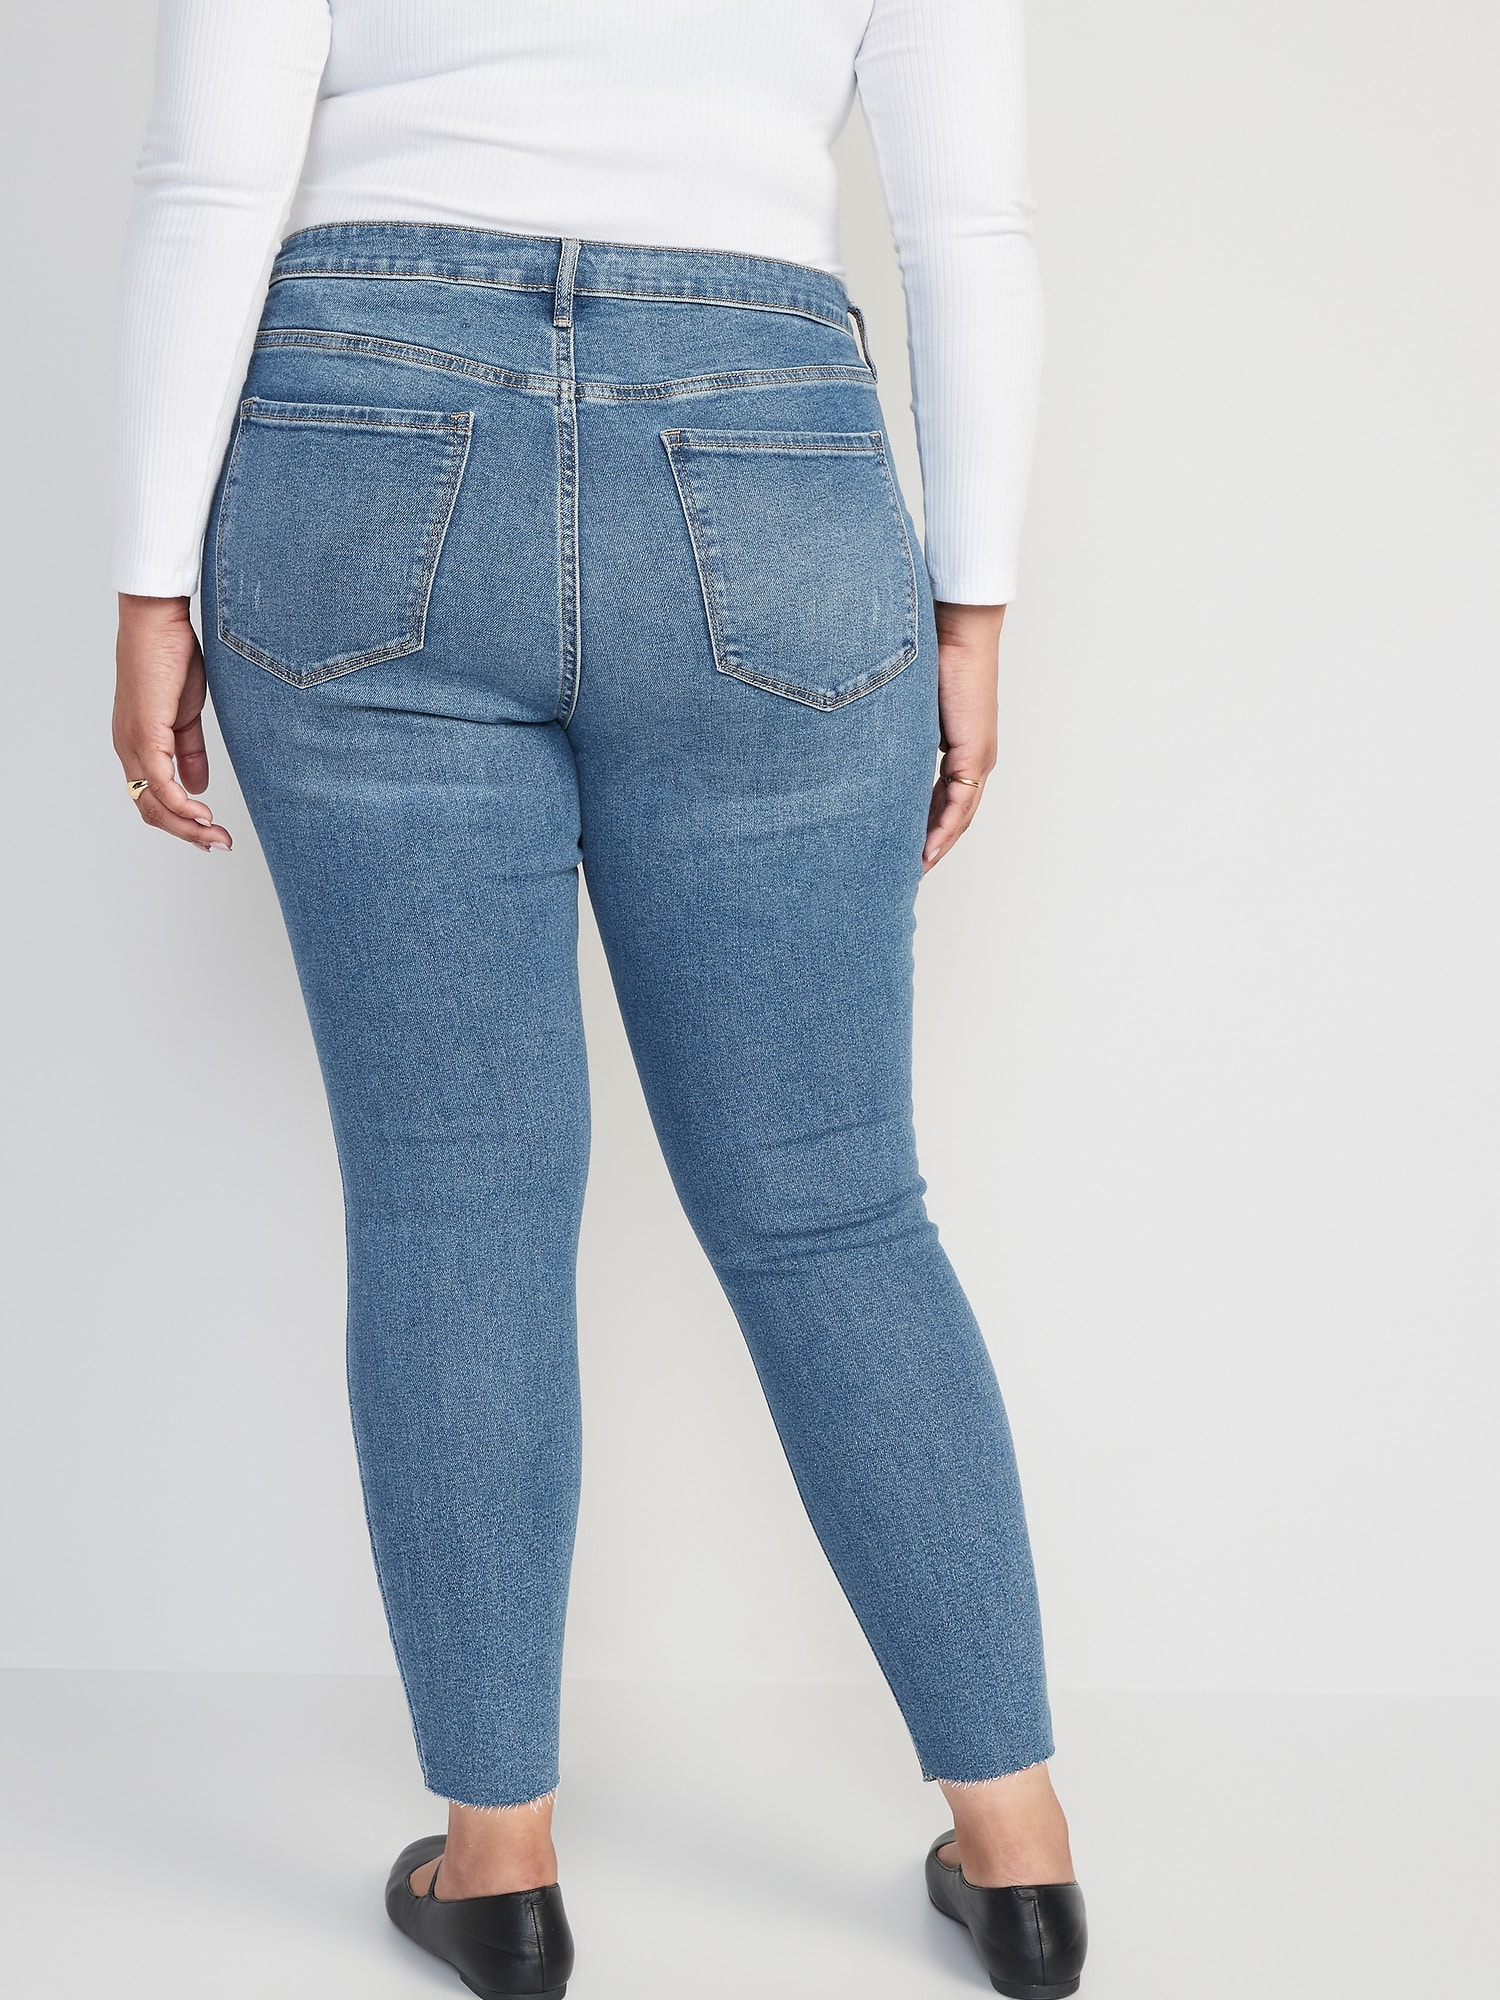 Mid-Rise Rockstar Super Skinny Ripped Cut-Off Jeans for Women | Old Navy